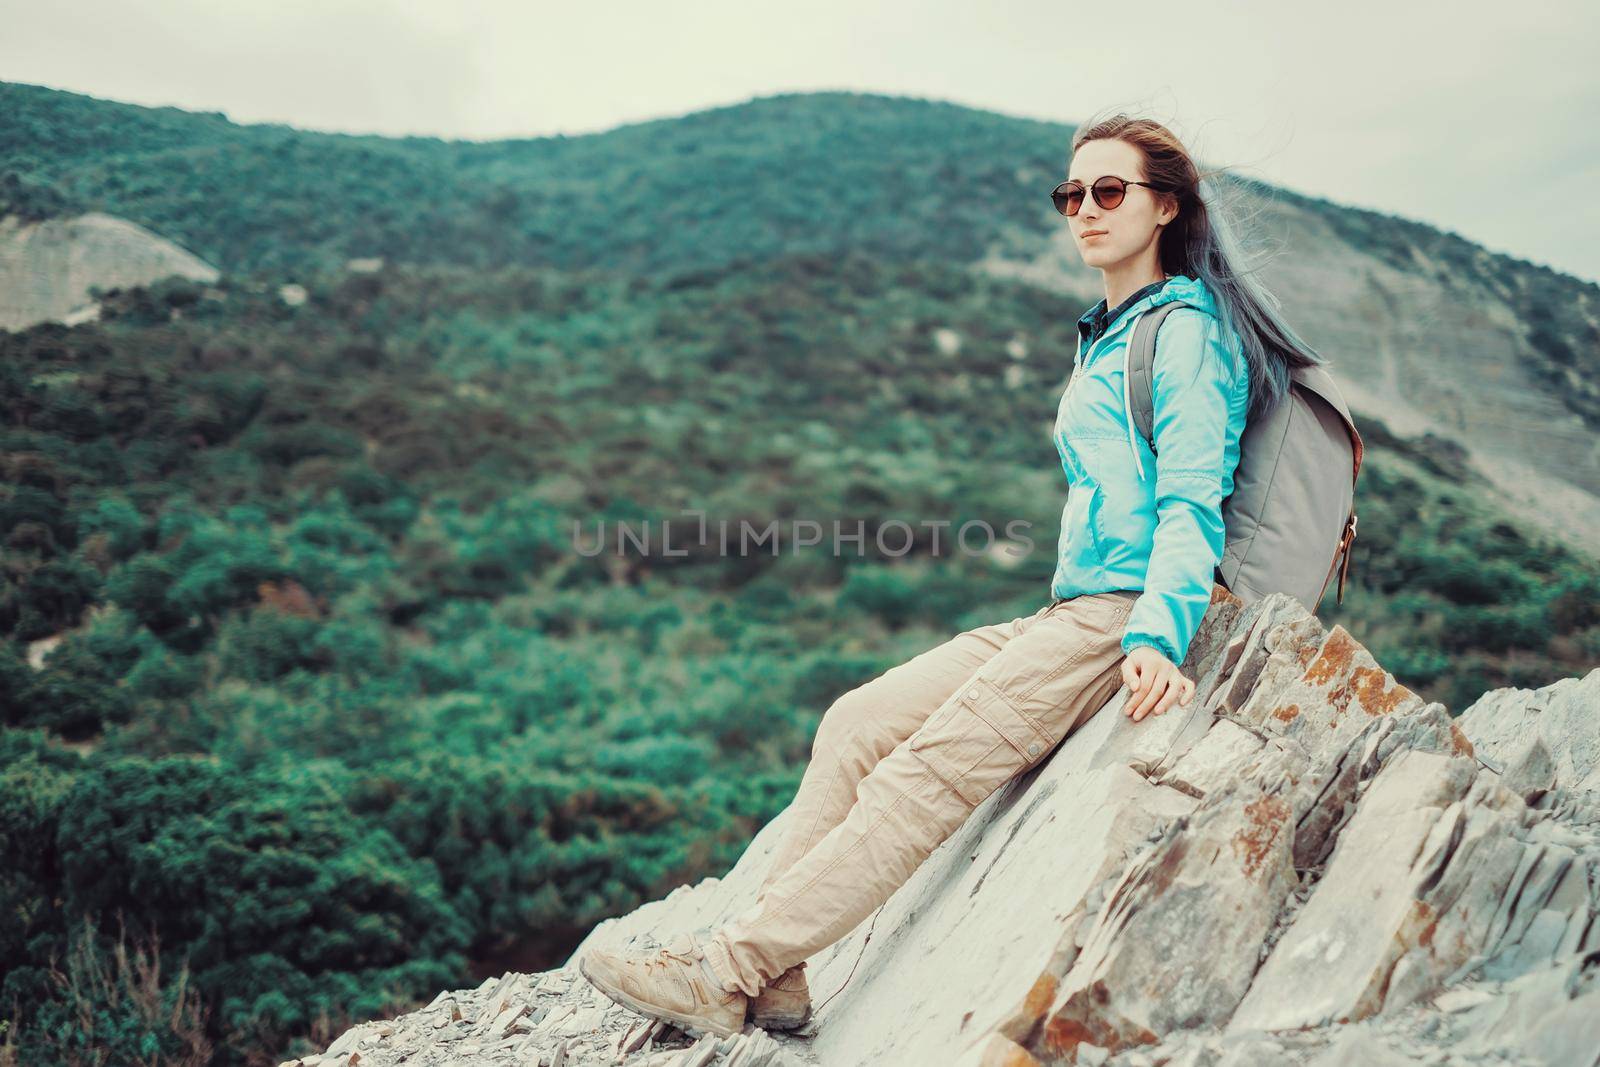 Beautiful hiker young woman resting on rocks in summer mountains. Toned image